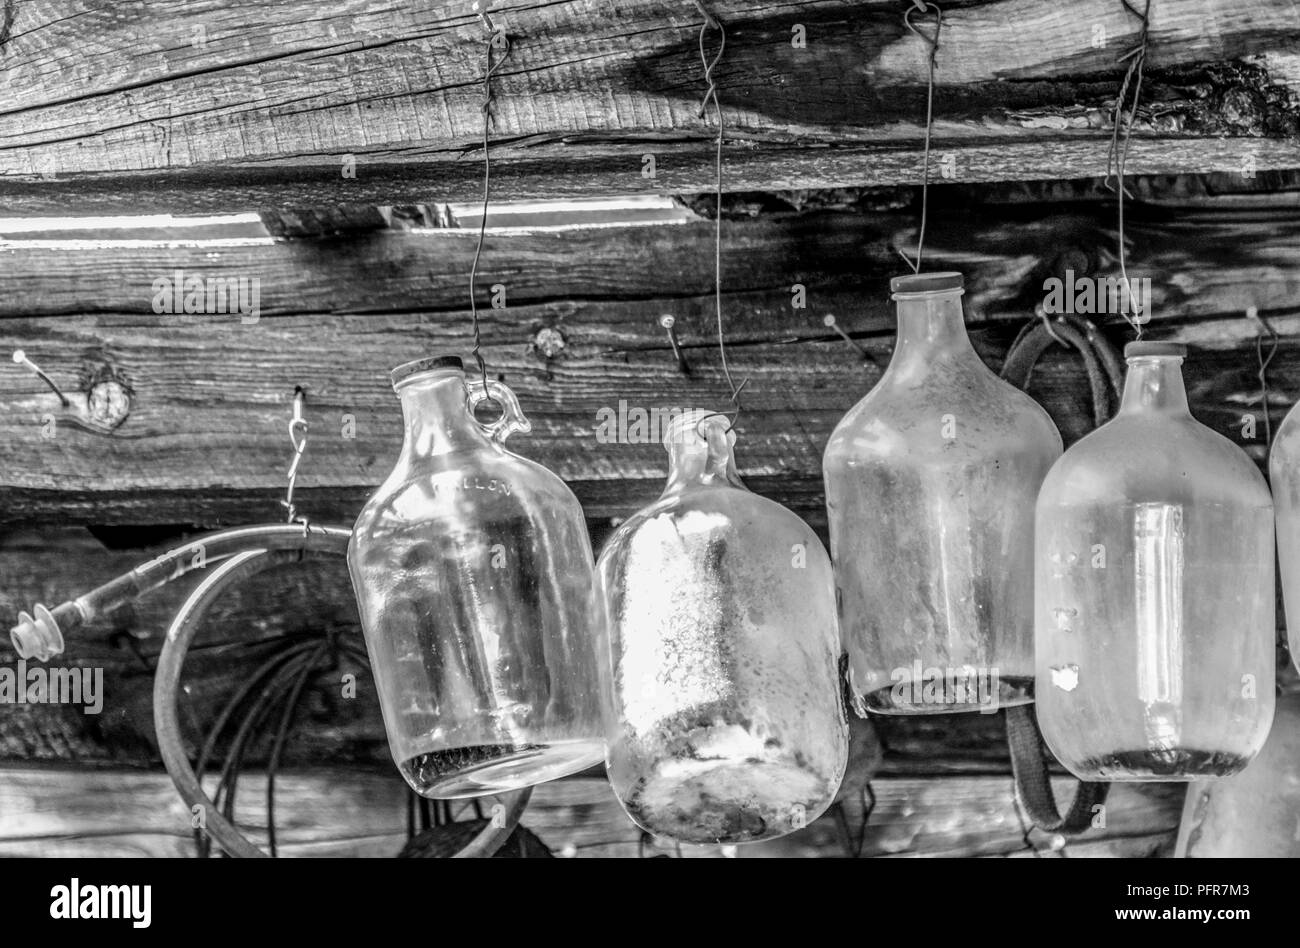 Black & white of glass jugs hanging from ceiling on wire Stock Photo